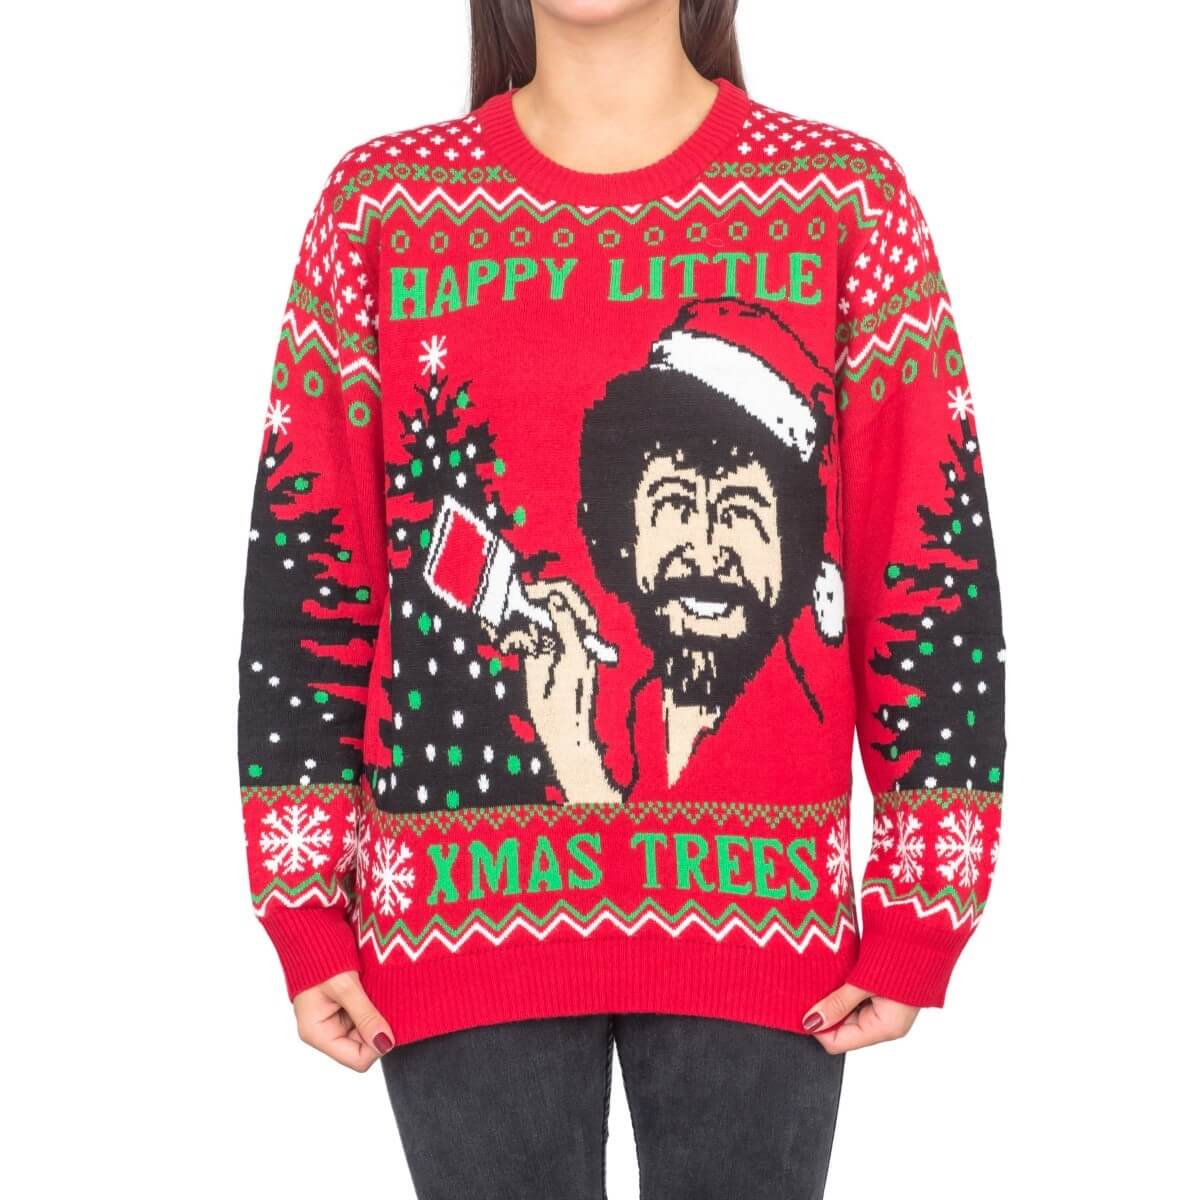 Happy Little Christmas Bob Ross Ornament Decoration Gifts  Best Decor  Ideas For Christmas Tree - Funny Ugly Christmas Sweater